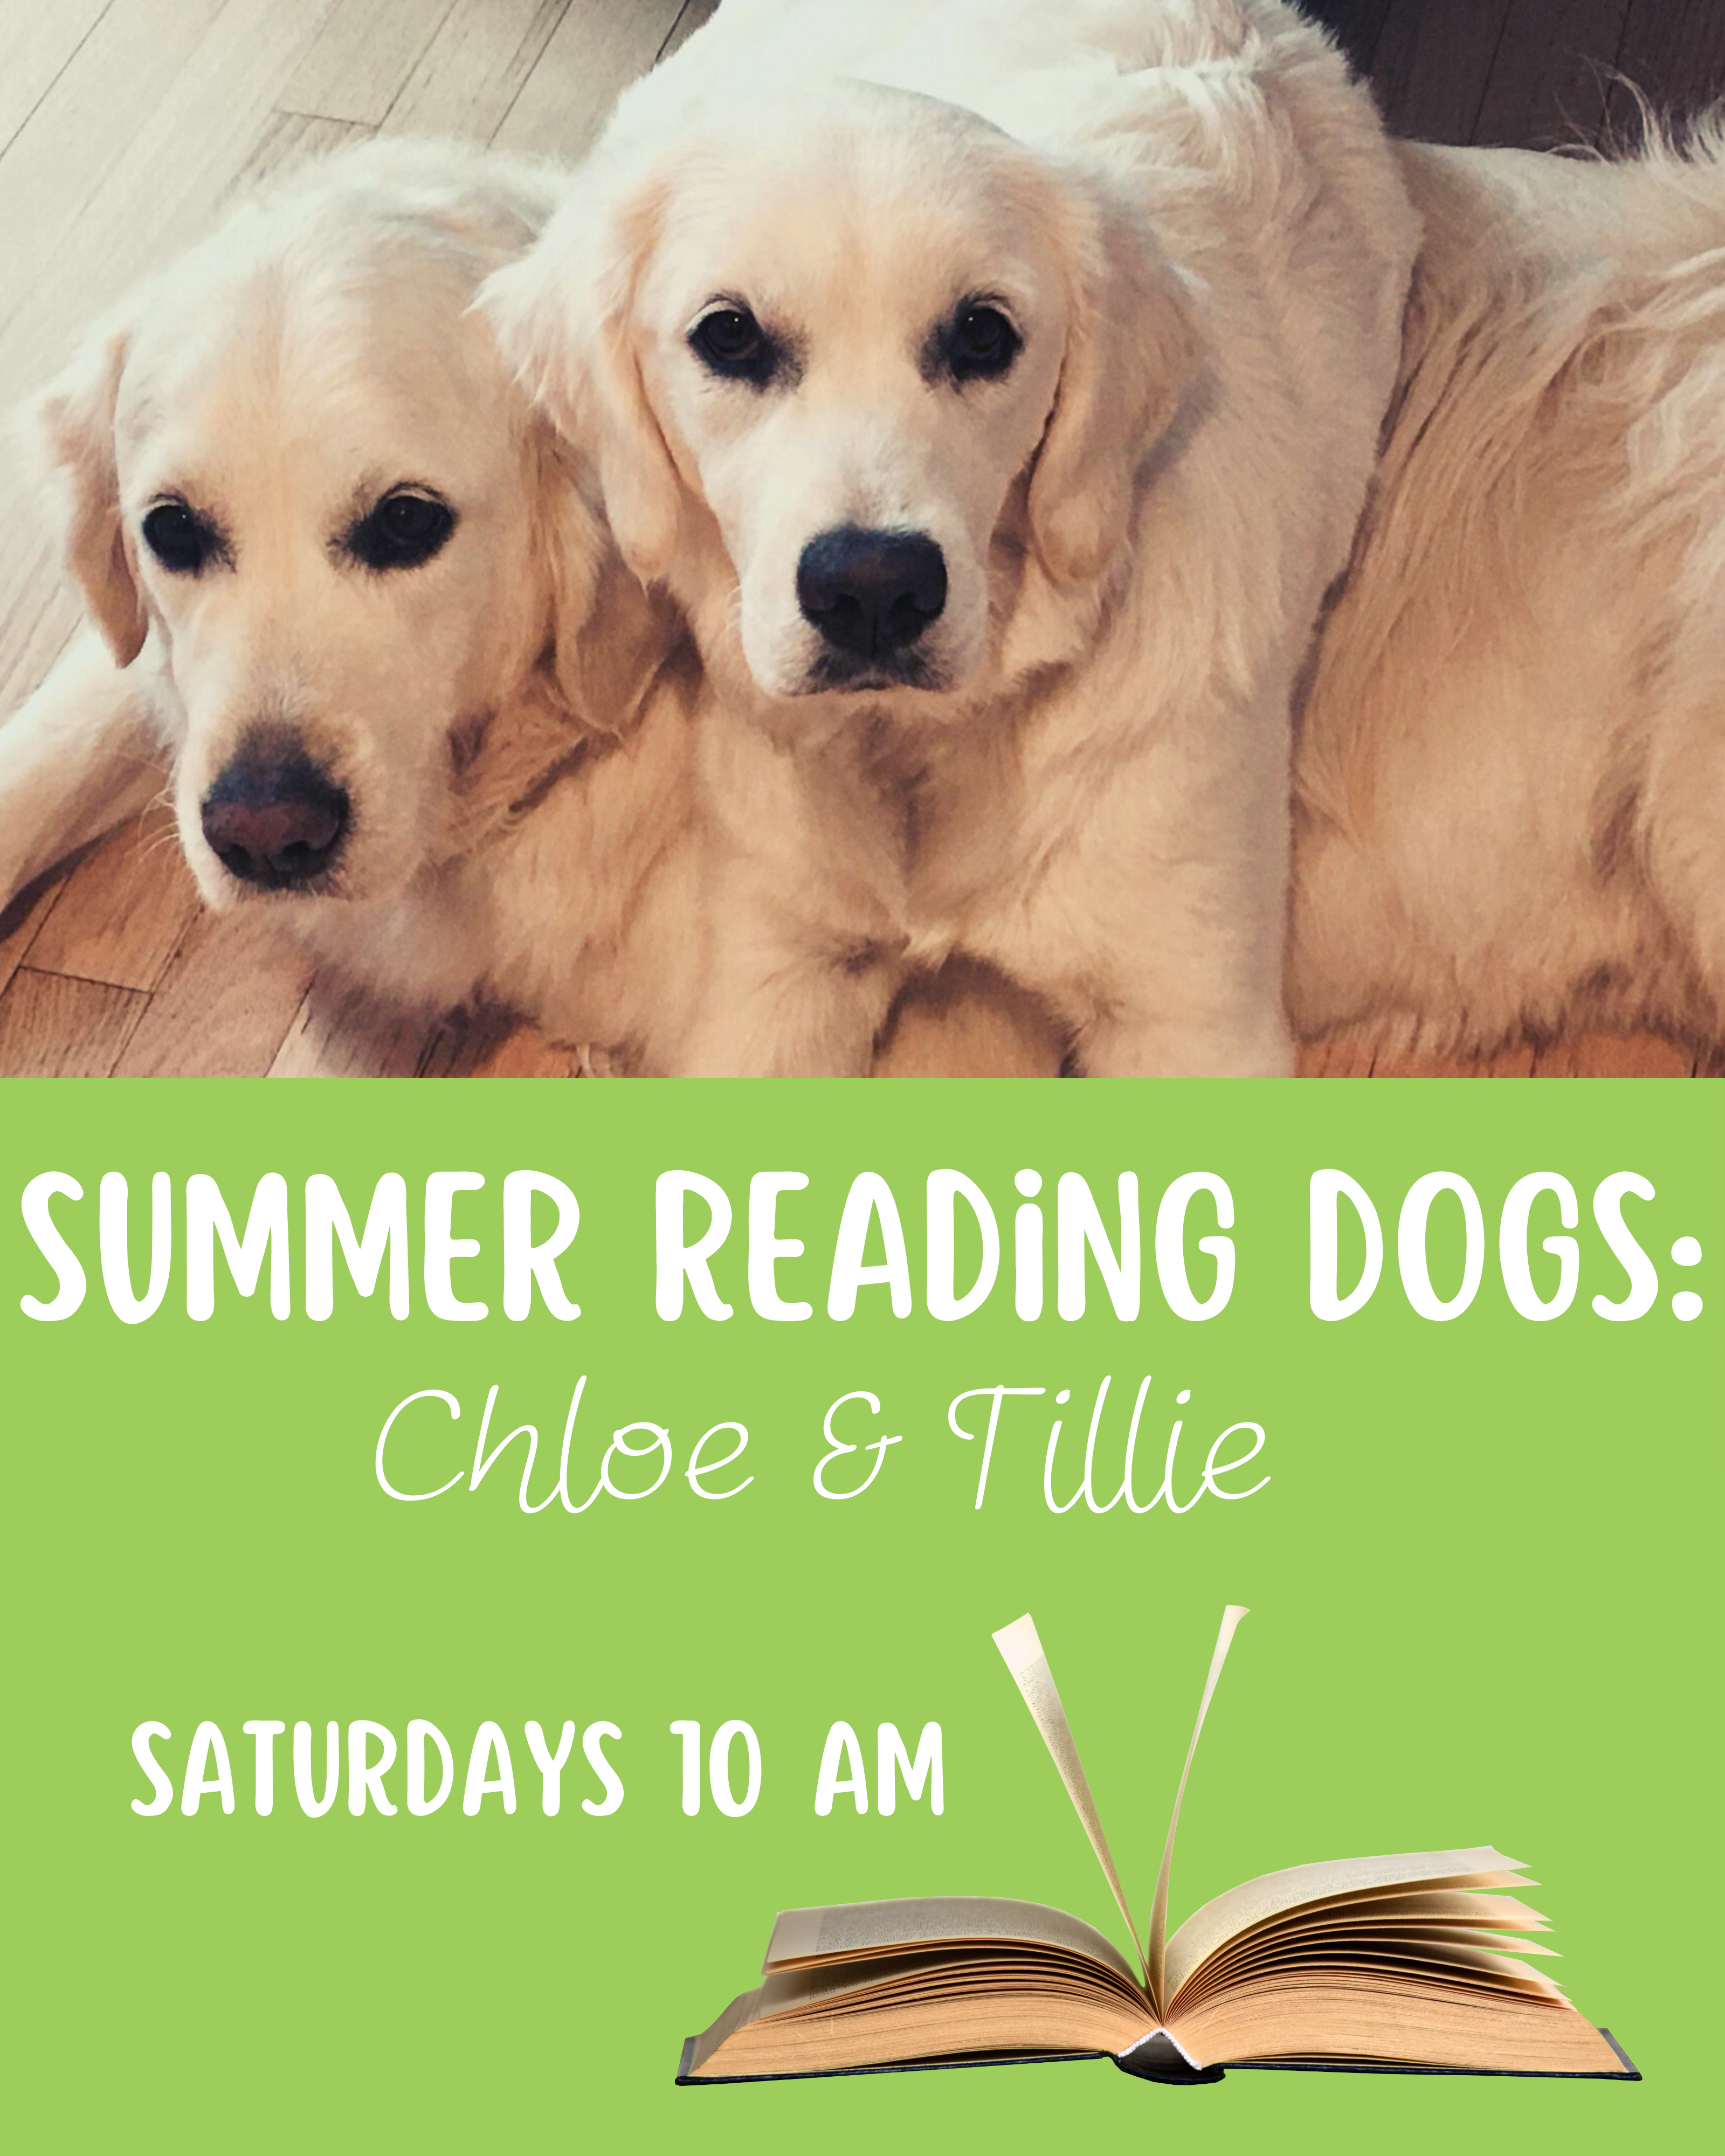 Photograph of two white golden retrievers accompanied by text: SUMMER READING DOGS: Chloe & Tillie SATURDAYS 10 AM